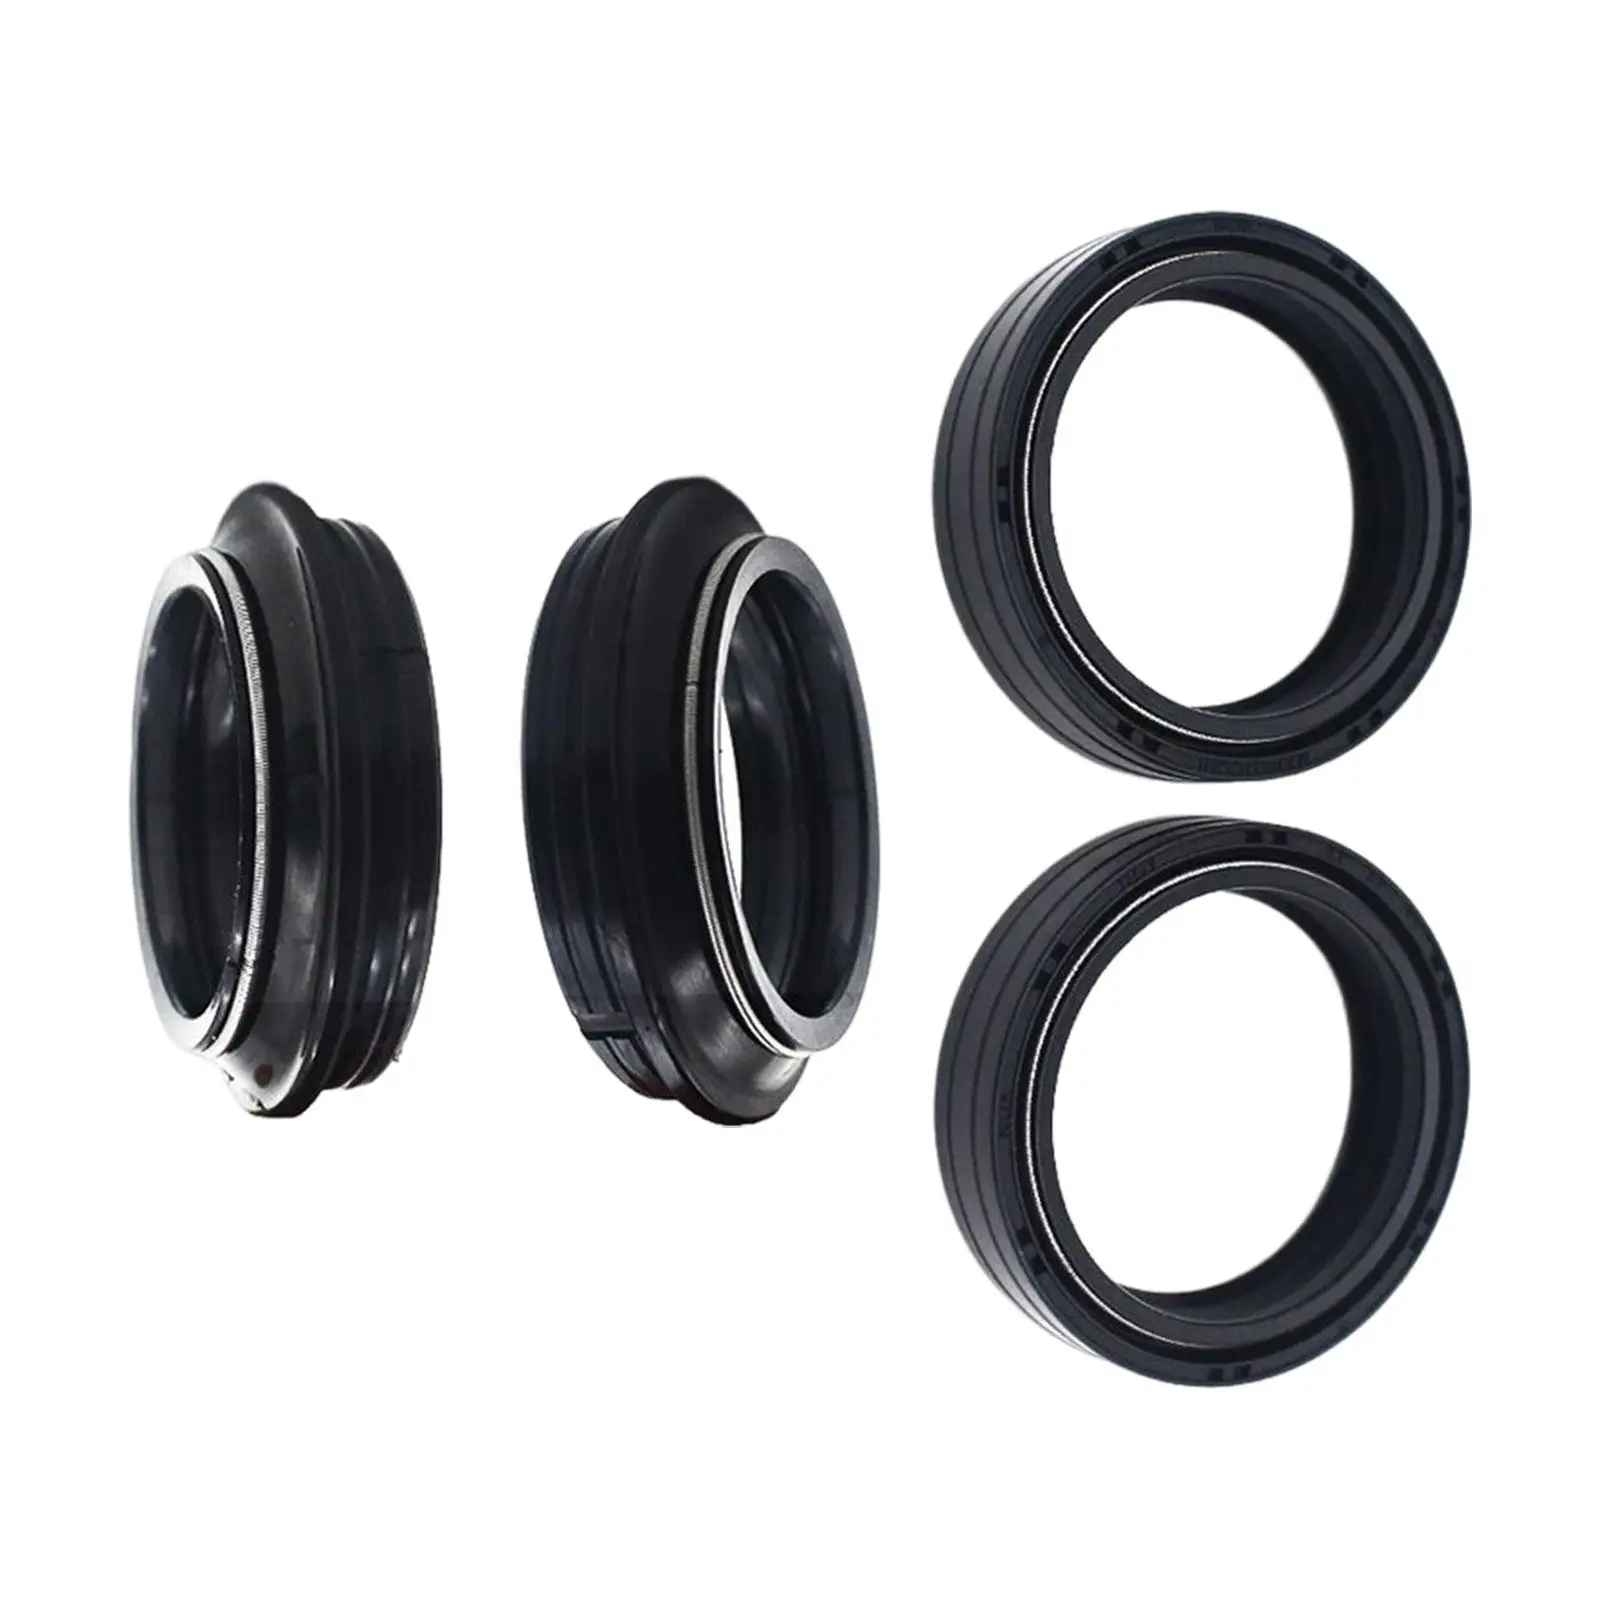 Fork Seal and Dust Seal Kit/ 37x47x11mm Motorcycle Accessories/ Rubber for